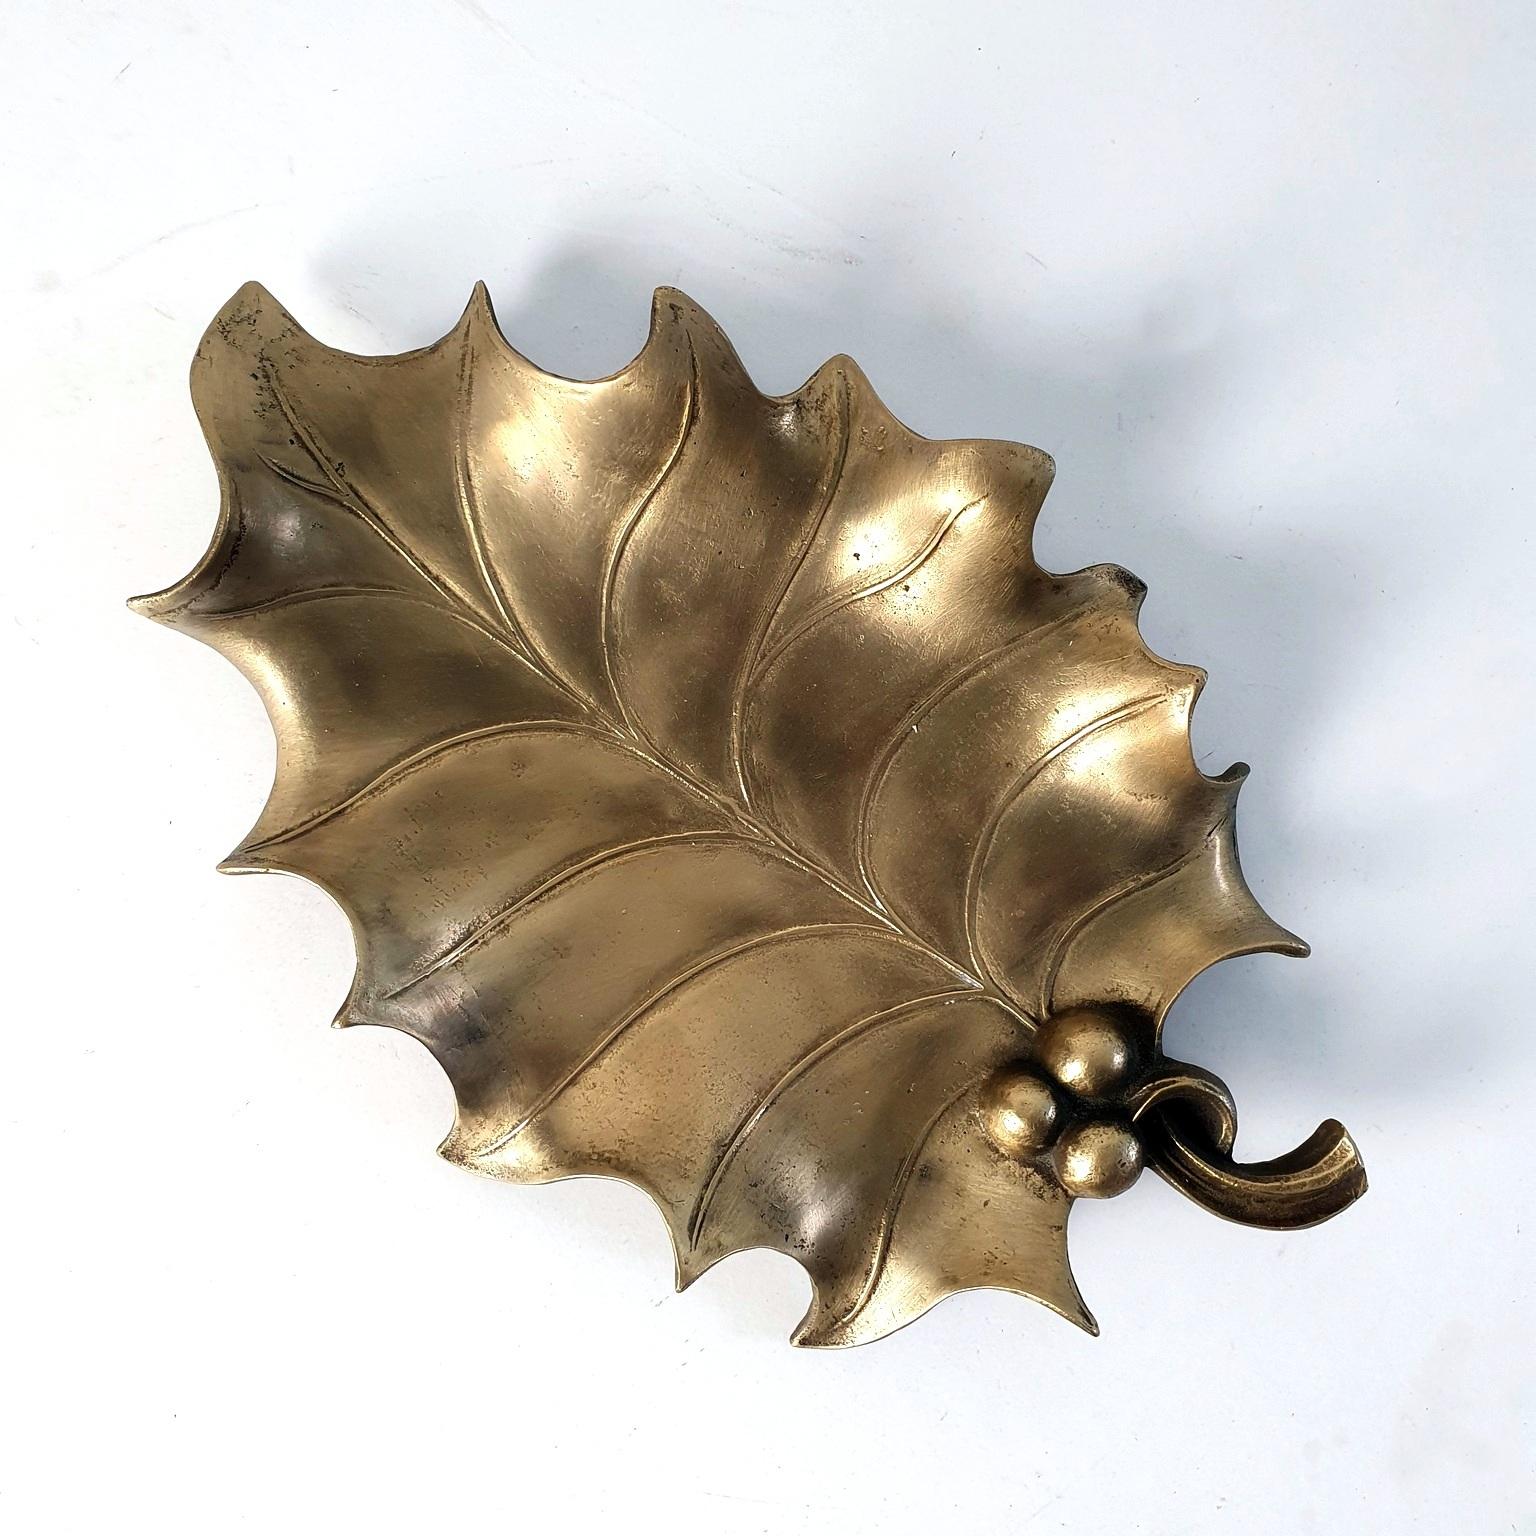 A large and heavy set handmade bronze tray in the shape of a holly leaf. Perfect for candy, snacks, fruit, keys or simply for decorative purposes.